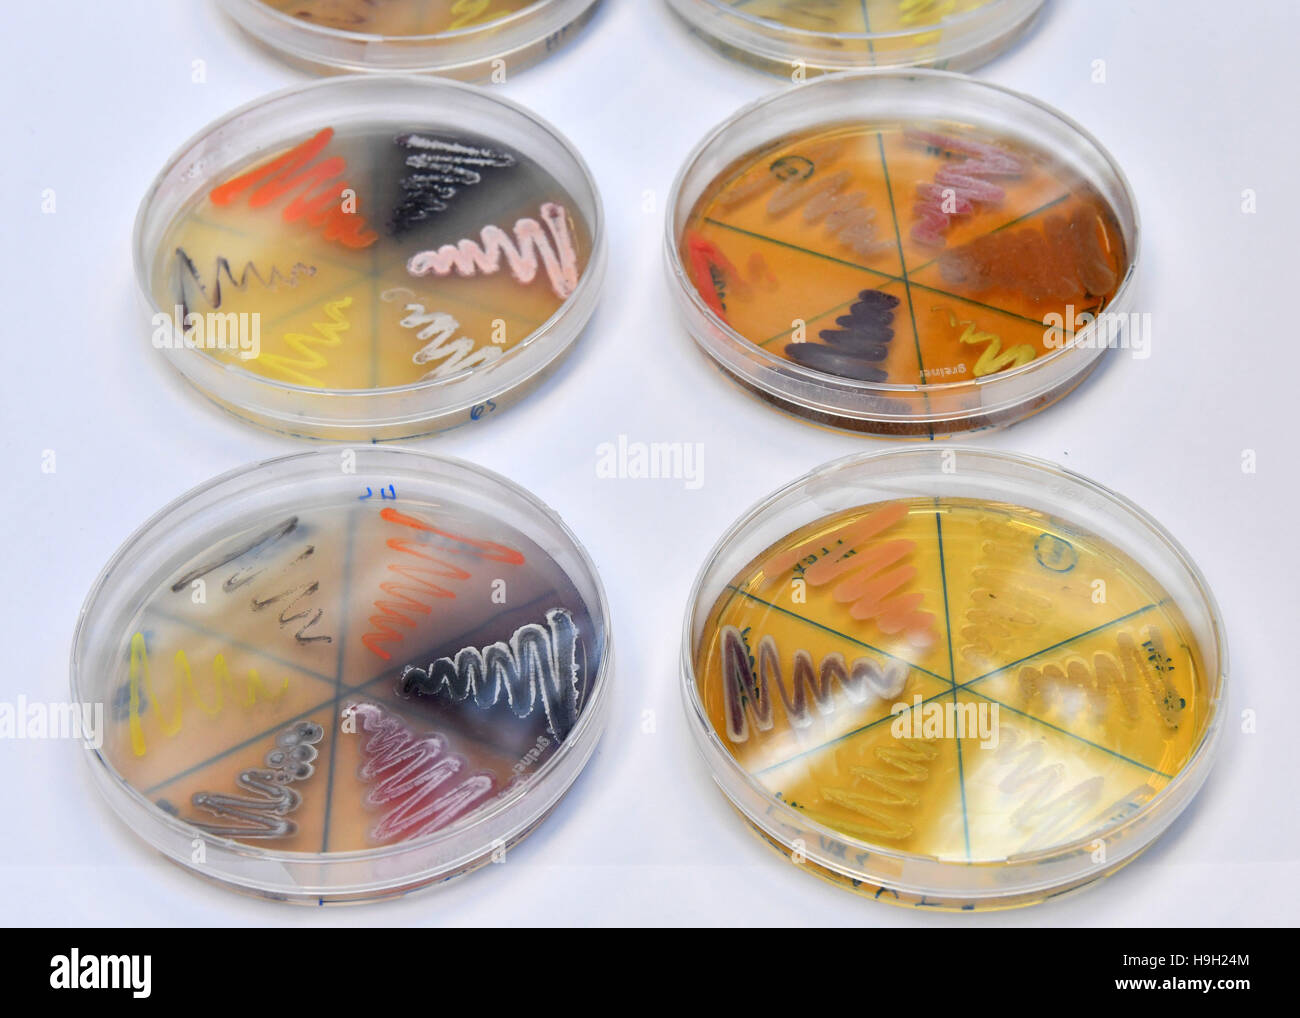 Jena, Germany. 23rd Nov, 2016. Microorganismas on various nutrient mediums pictured during a visit by German President Gauck to the Leibniz Institute for Natural Product Research and Infection Biology in Jena, Germany, 23 November 2016. Photo: Martin Schutt/dpa-Zentralbild/dpa/Alamy Live News Stock Photo